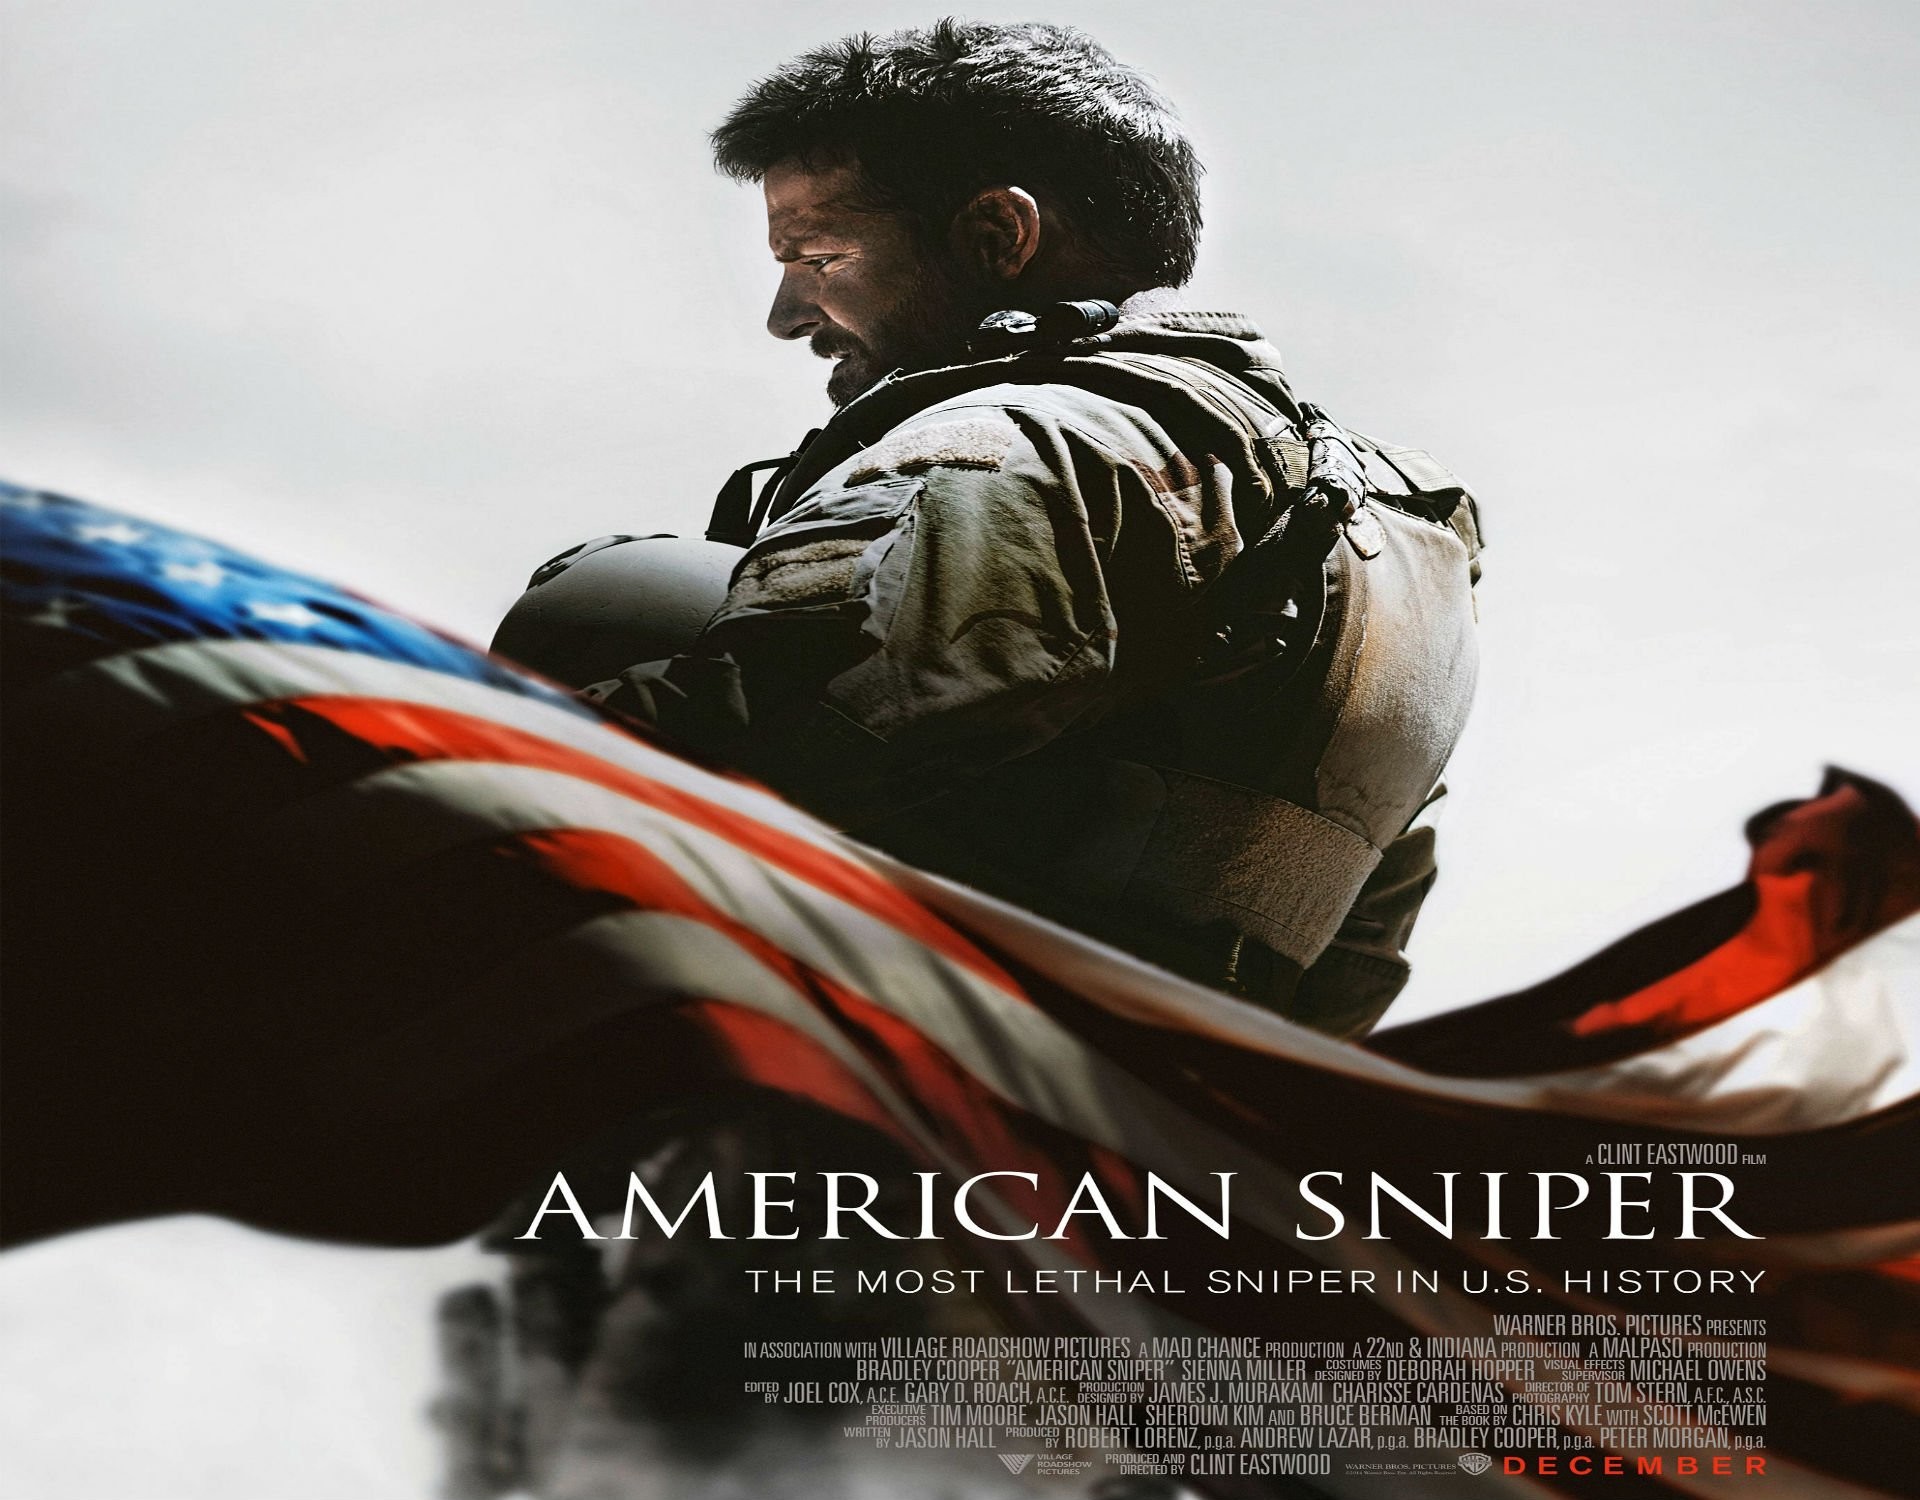 1920x1500 AMERICAN SNIPER biography military war fighting navy seal action clint  eastwood 1americansniper weapon gun wallpaper |  | 575047 |  WallpaperUP